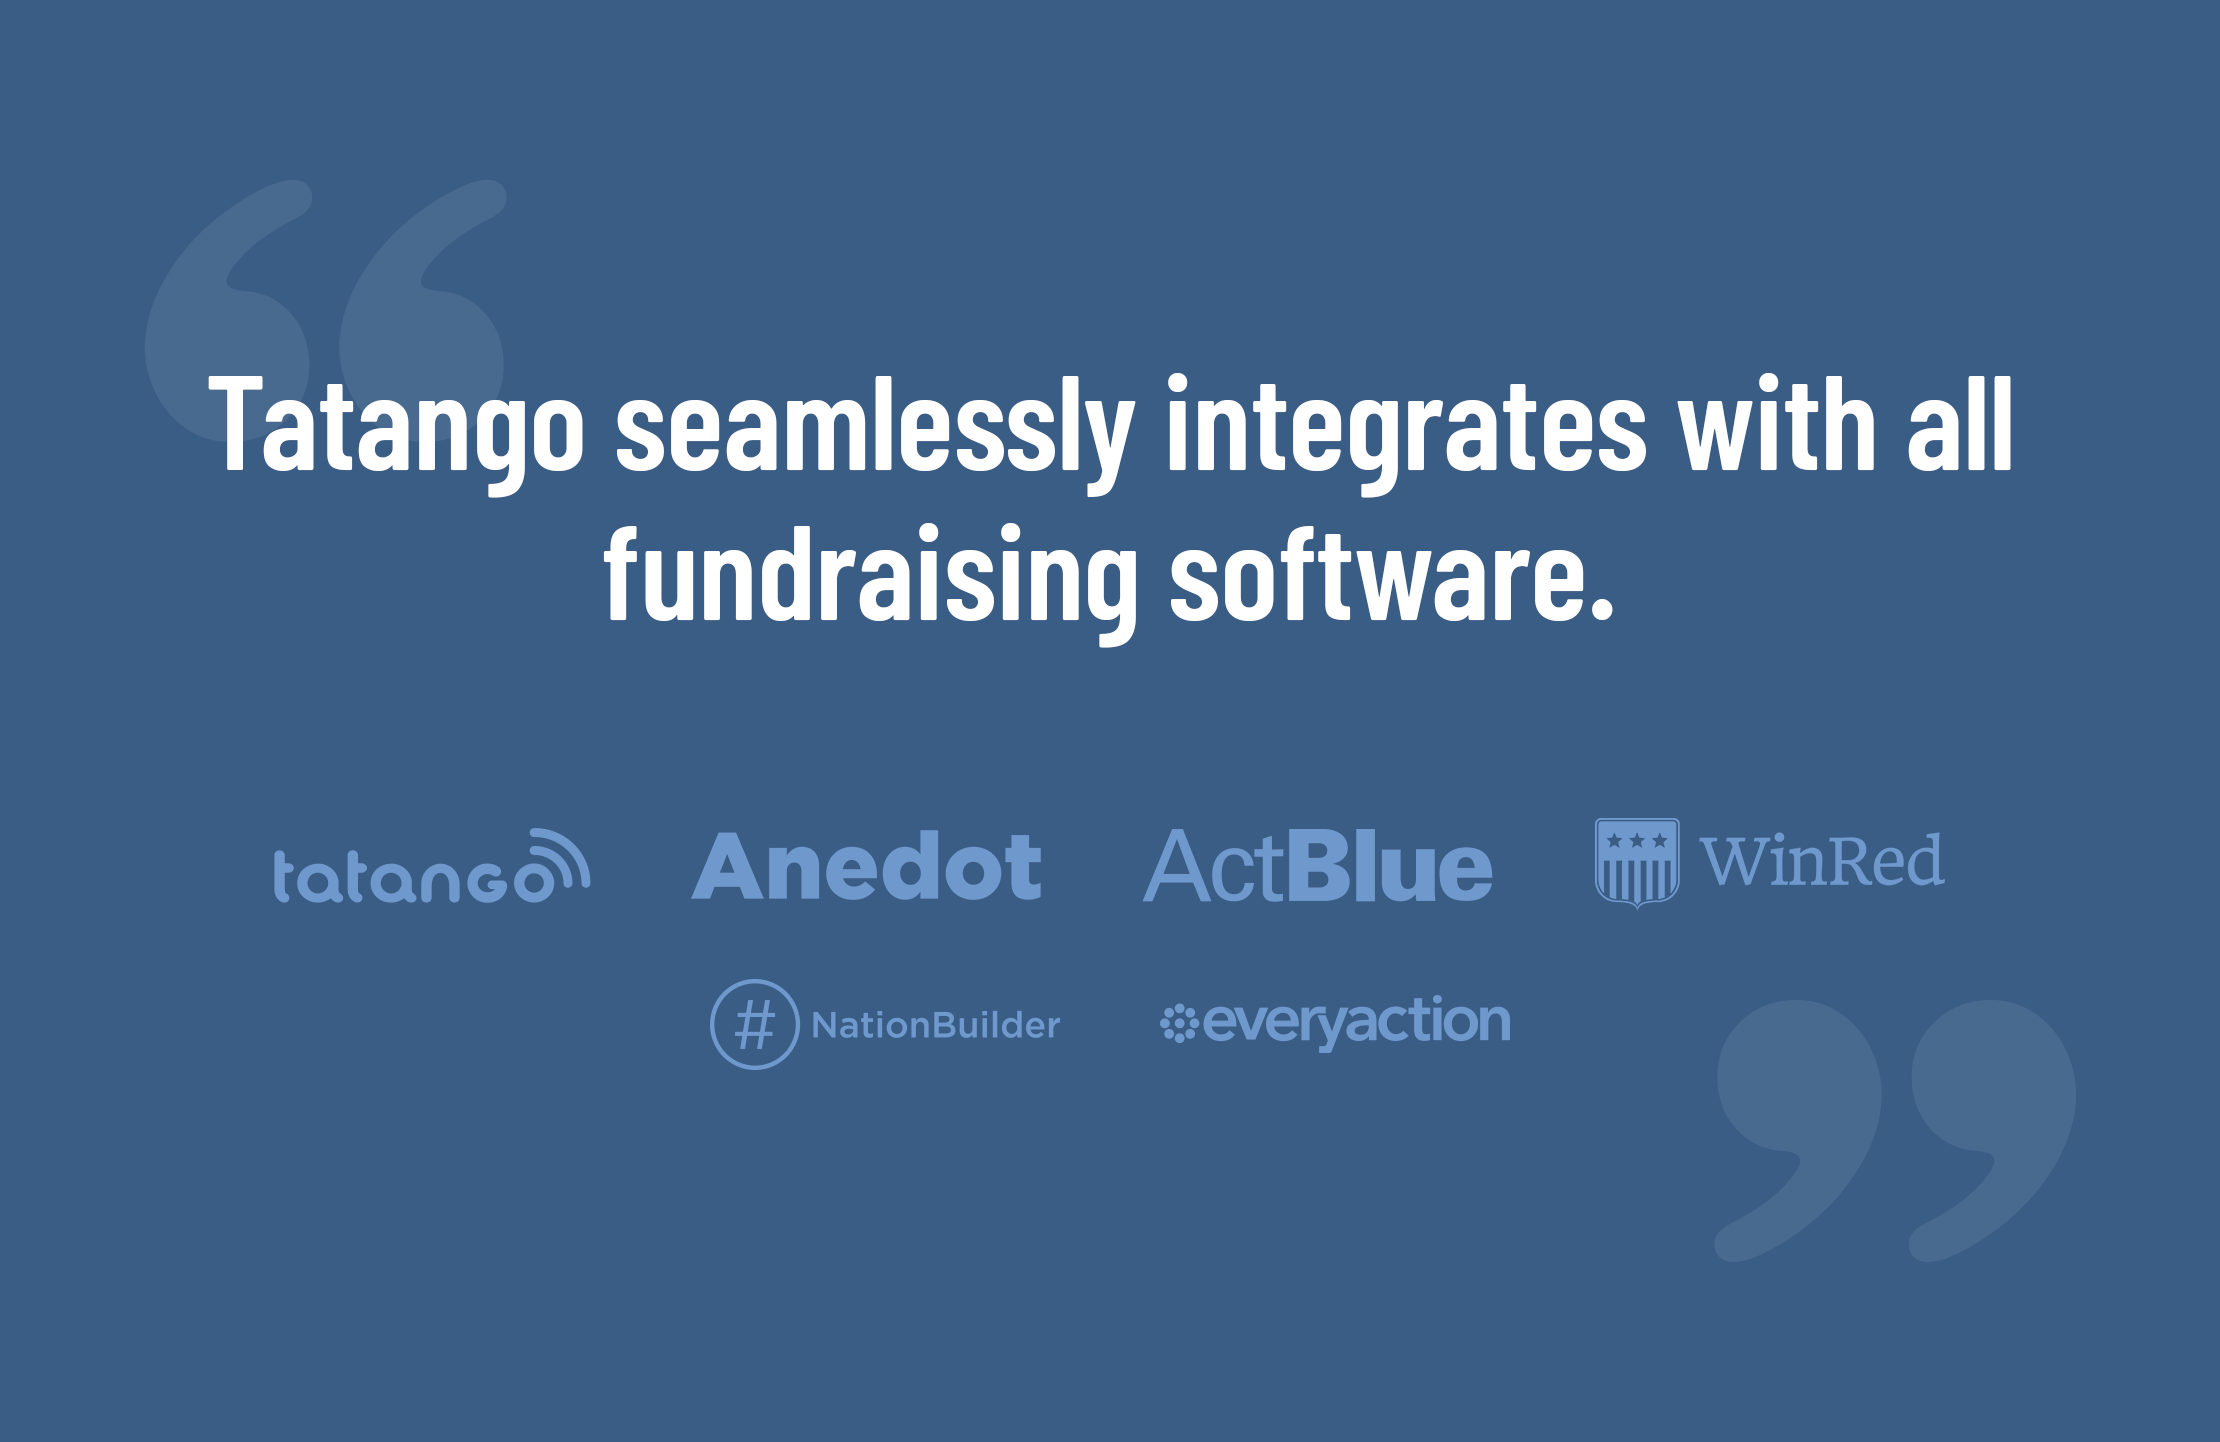 Tatango seamlessly integrates with all fundraising software